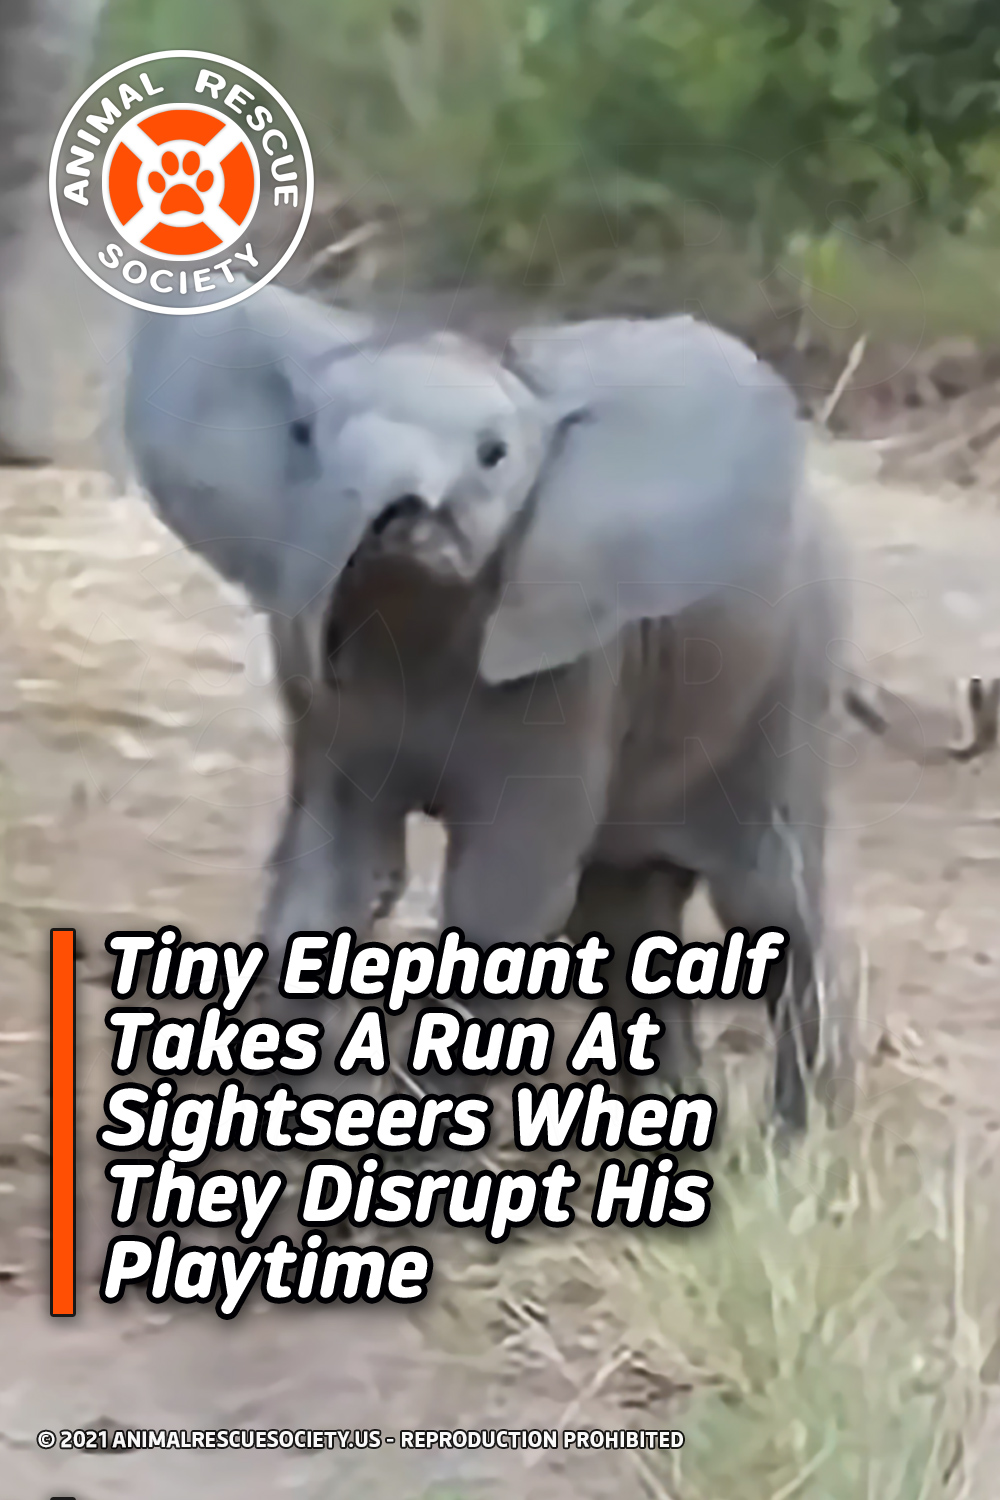 Tiny Elephant Calf Takes A Run At Sightseers When They Disrupt His Playtime